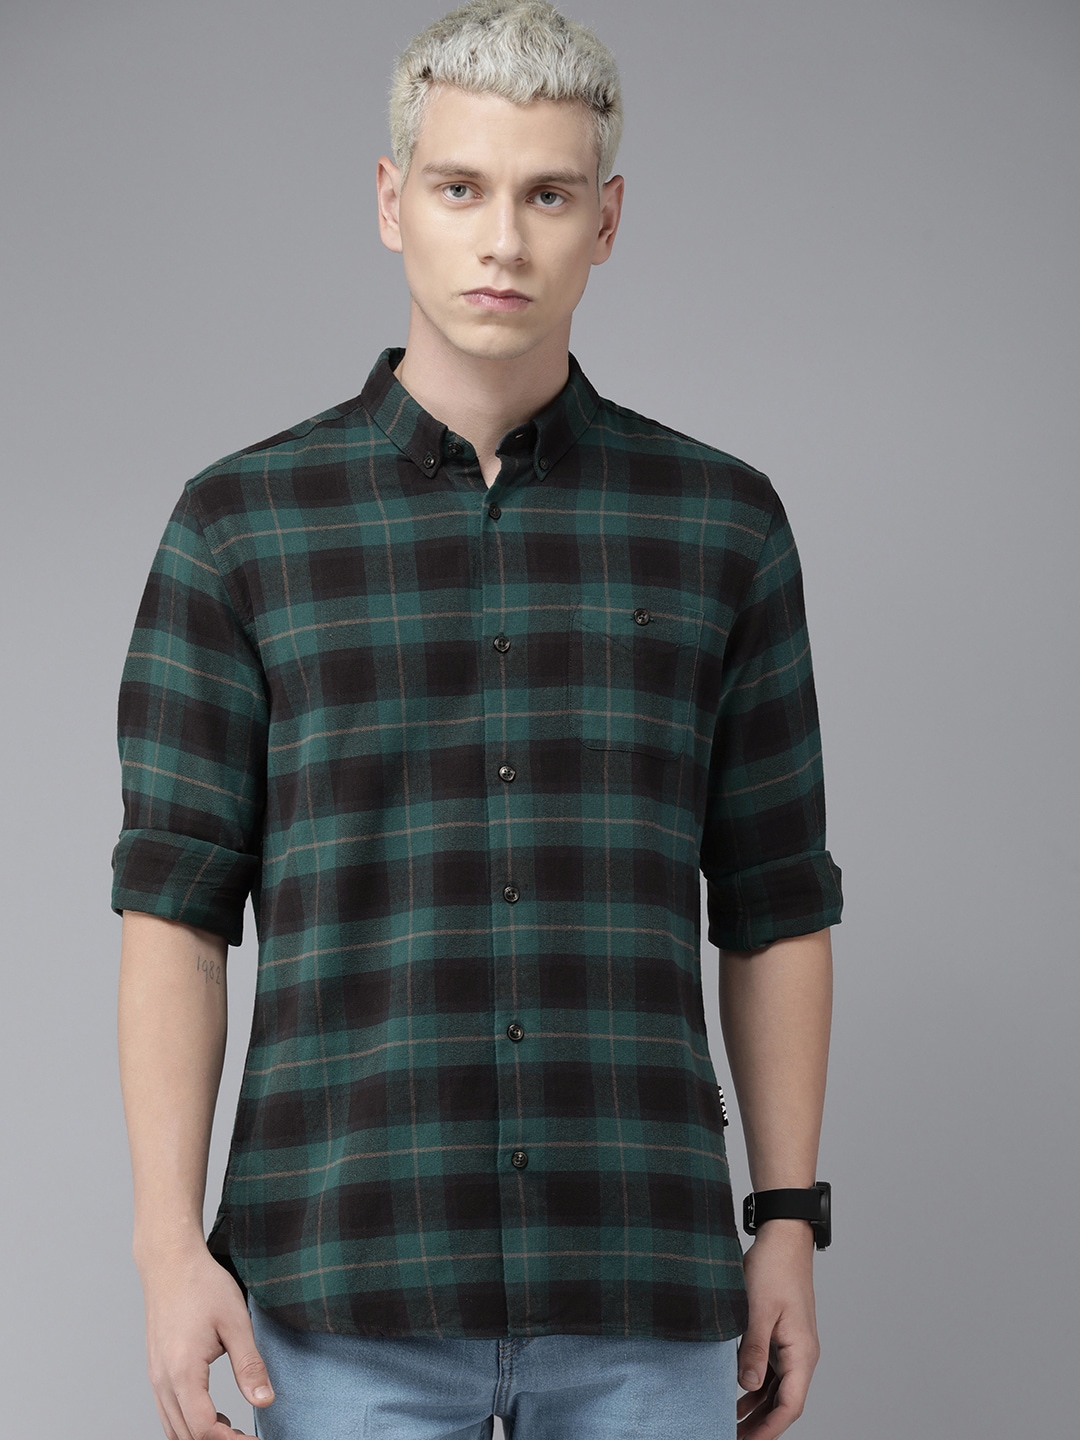 THE BEAR HOUSE Slim Fit Checked Pure Cotton Casual Shirt